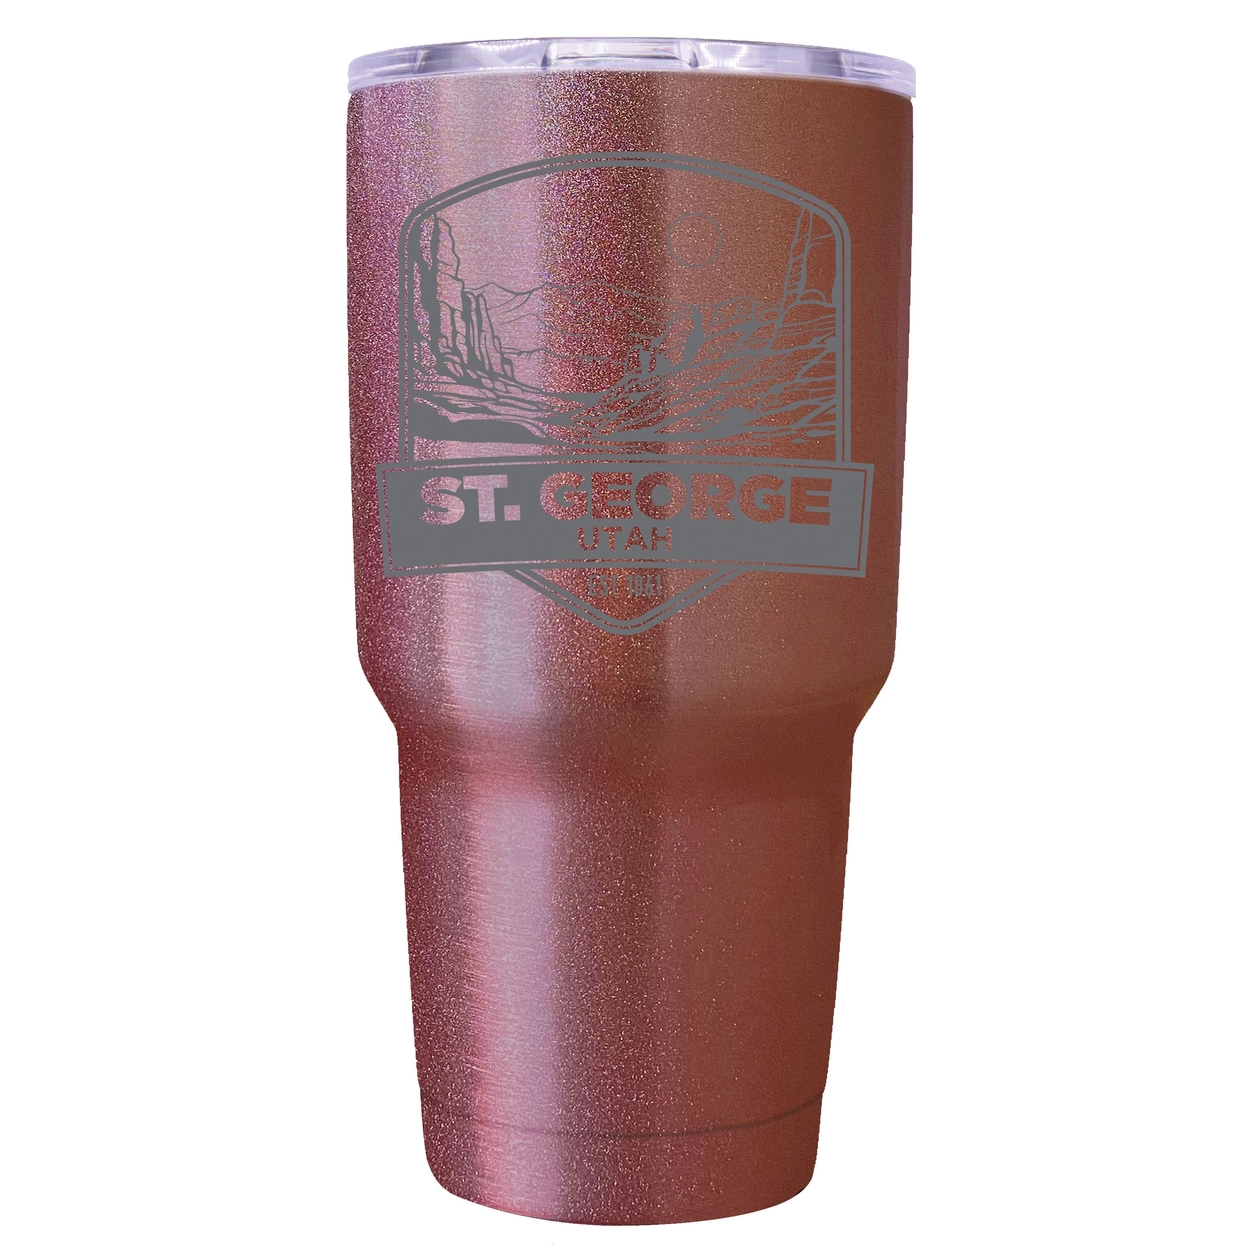 St. George Utah Souvenir 24 Oz Engraved Insulated Stainless Steel Tumbler - White,,Single Unit